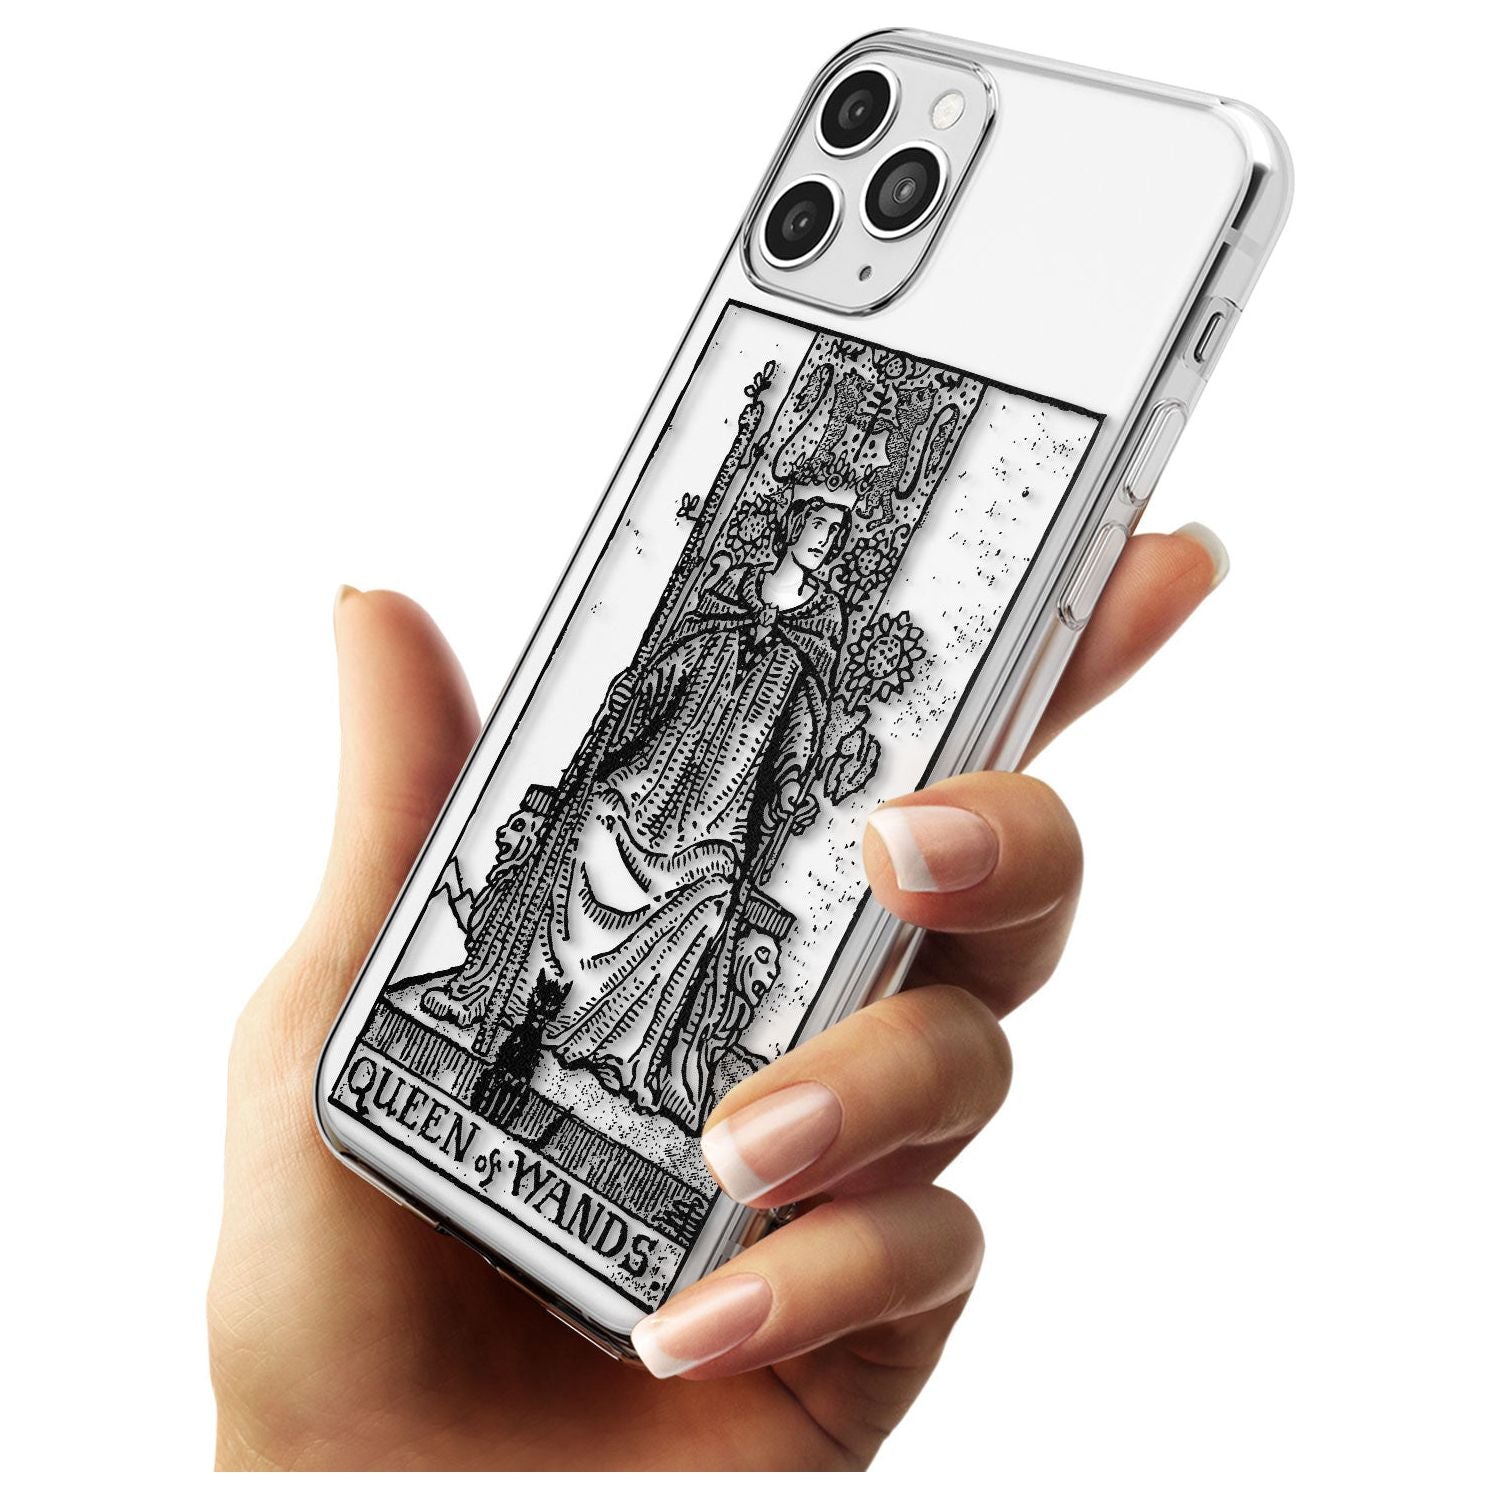 Queen of Wands Tarot Card - Transparent Black Impact Phone Case for iPhone 11 Pro Max